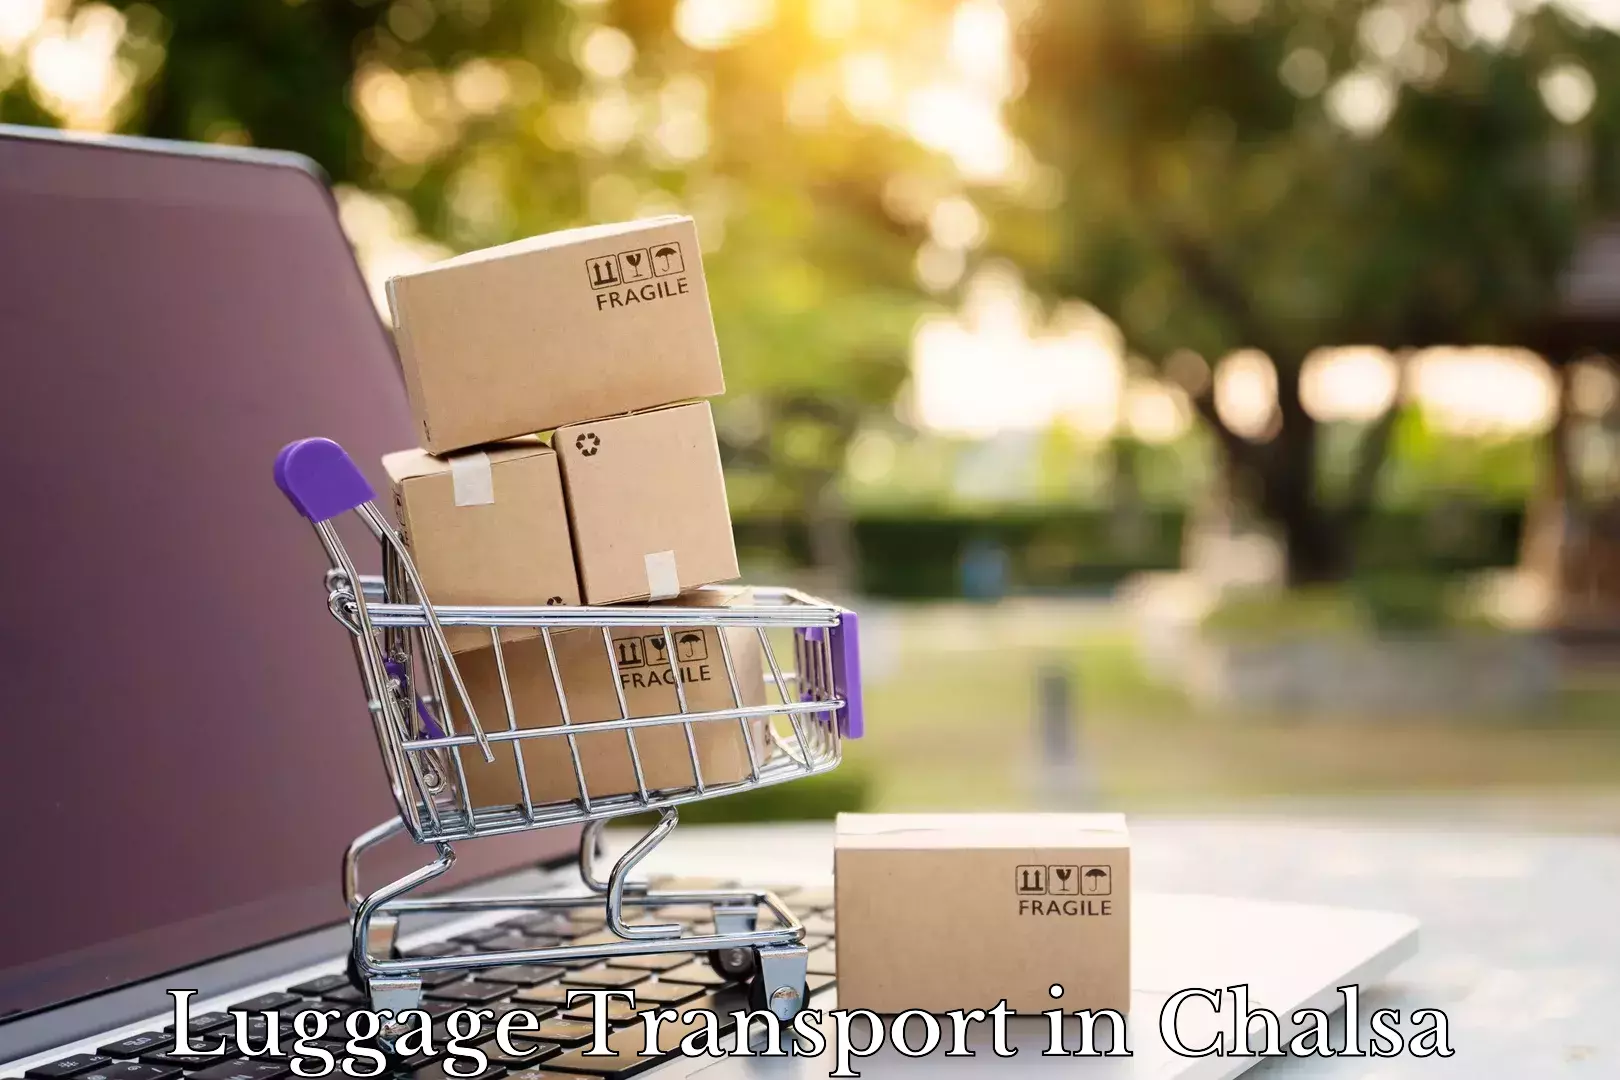 Discounted baggage transport in Chalsa